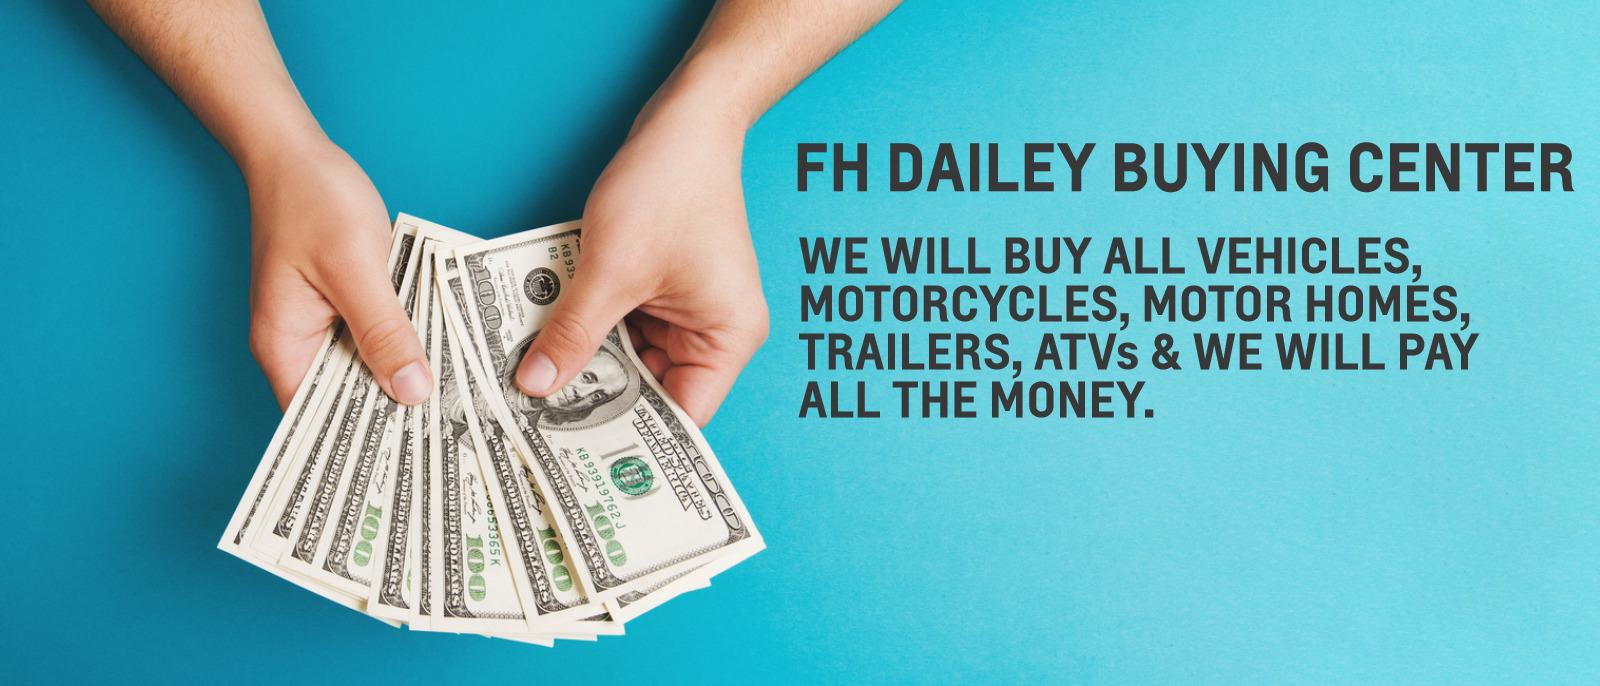 Please add we will buy all vehicles,motorcycles, Motor homes Trailer, Atv's and will pay all the money.
FH Dailey Buying center